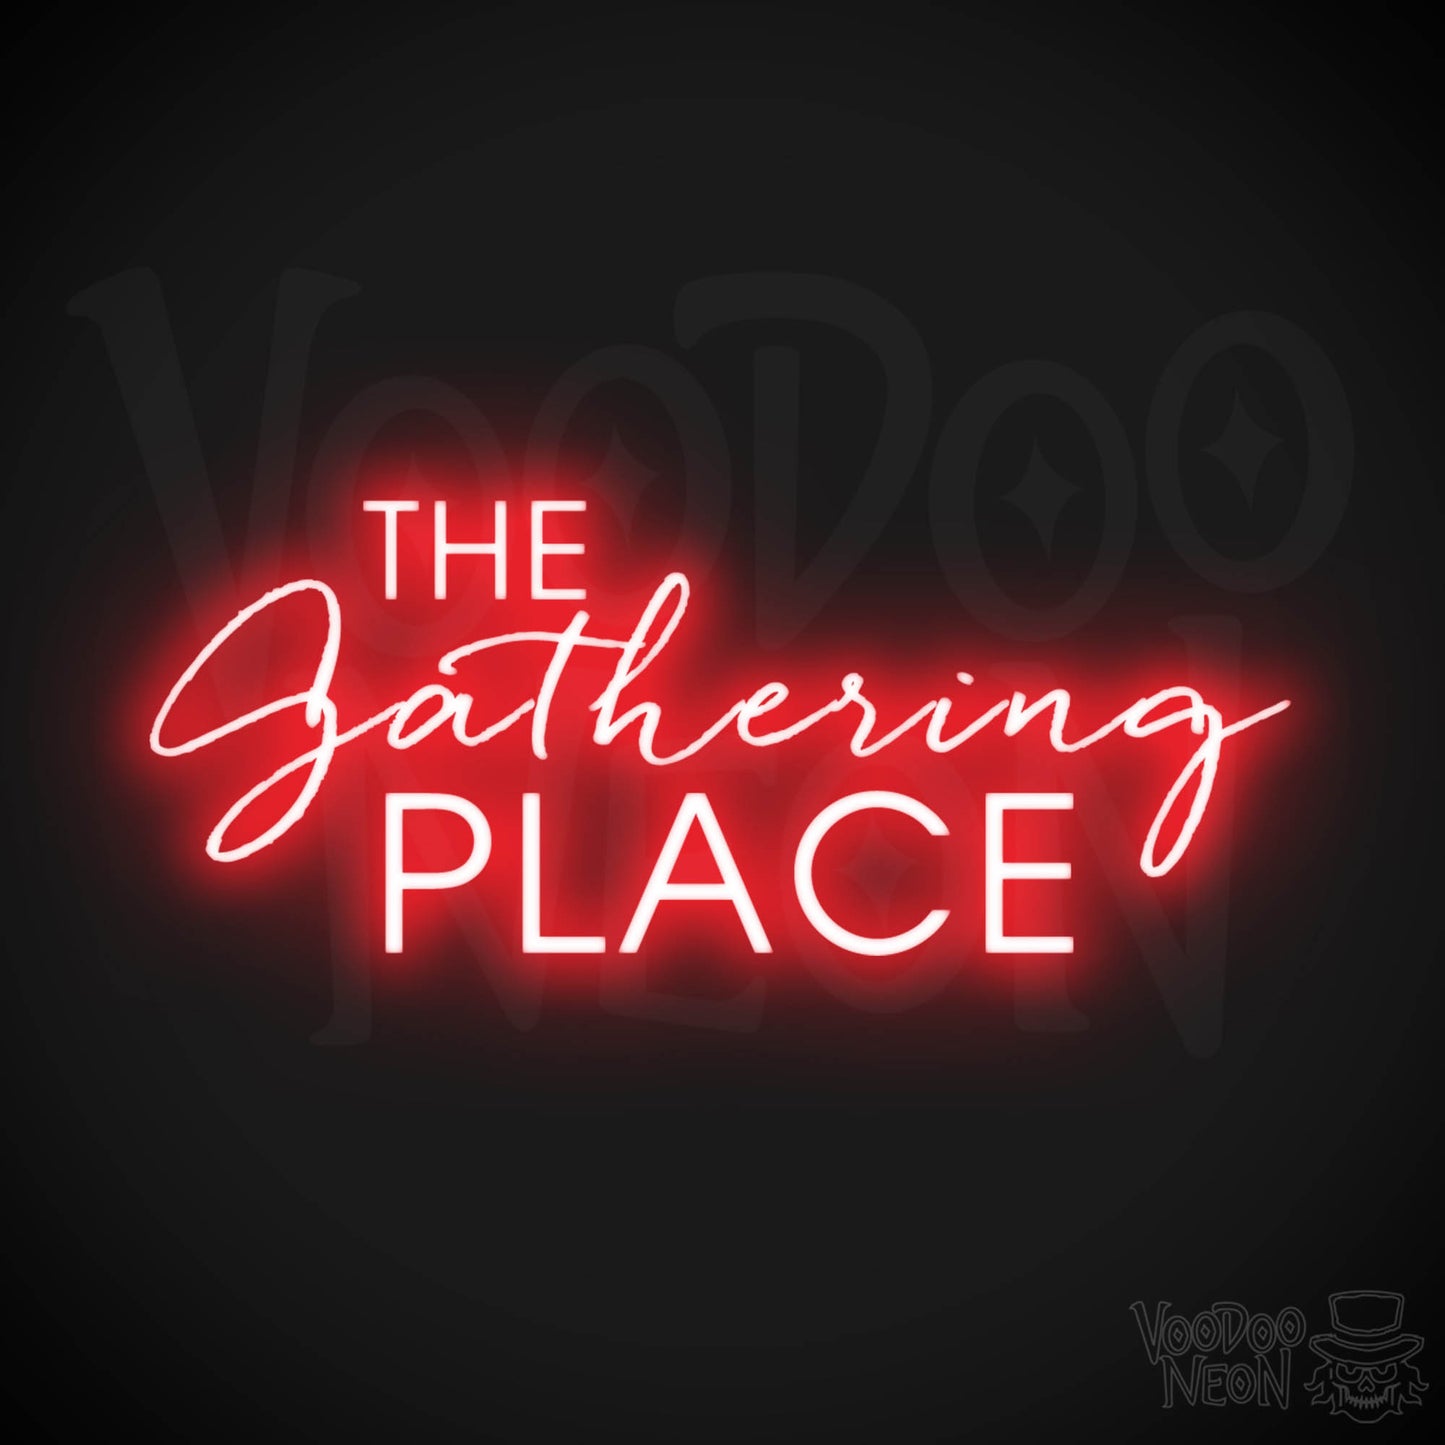 The Gathering Place Neon Sign - Neon The Gathering Place Sign - Wall Art - Color Red